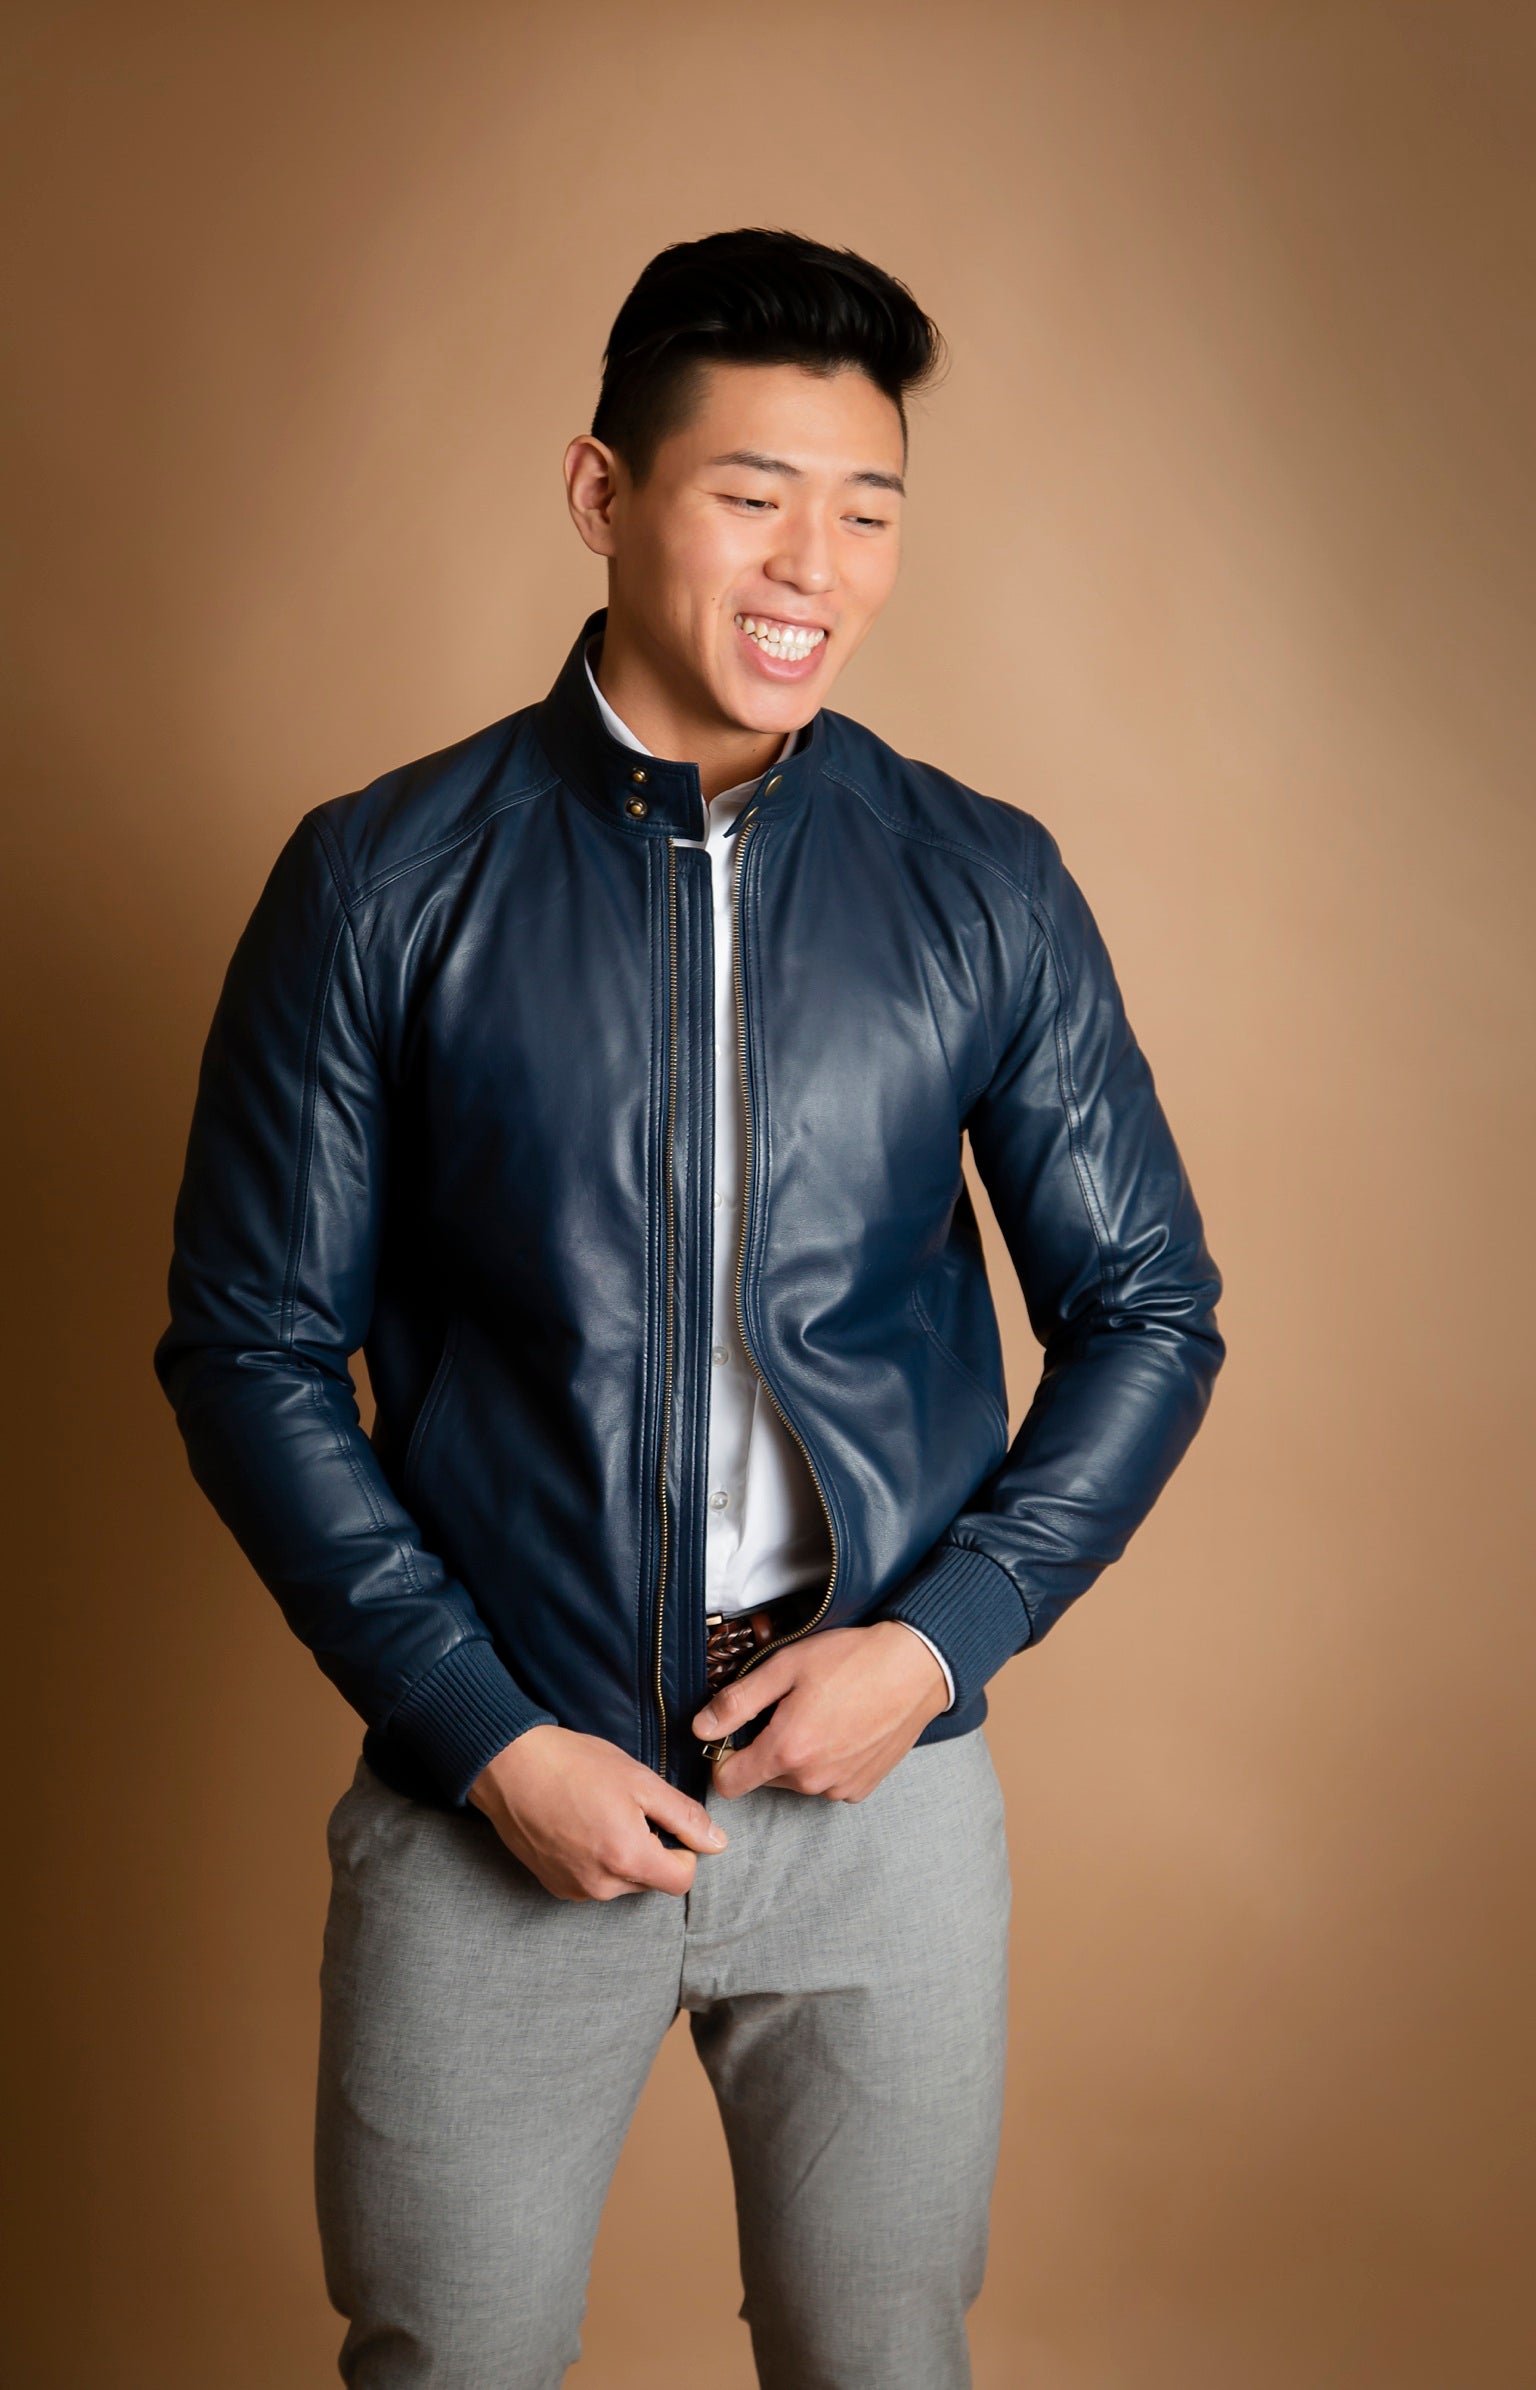 How Much a Good Quality Leather Jacket Cost?